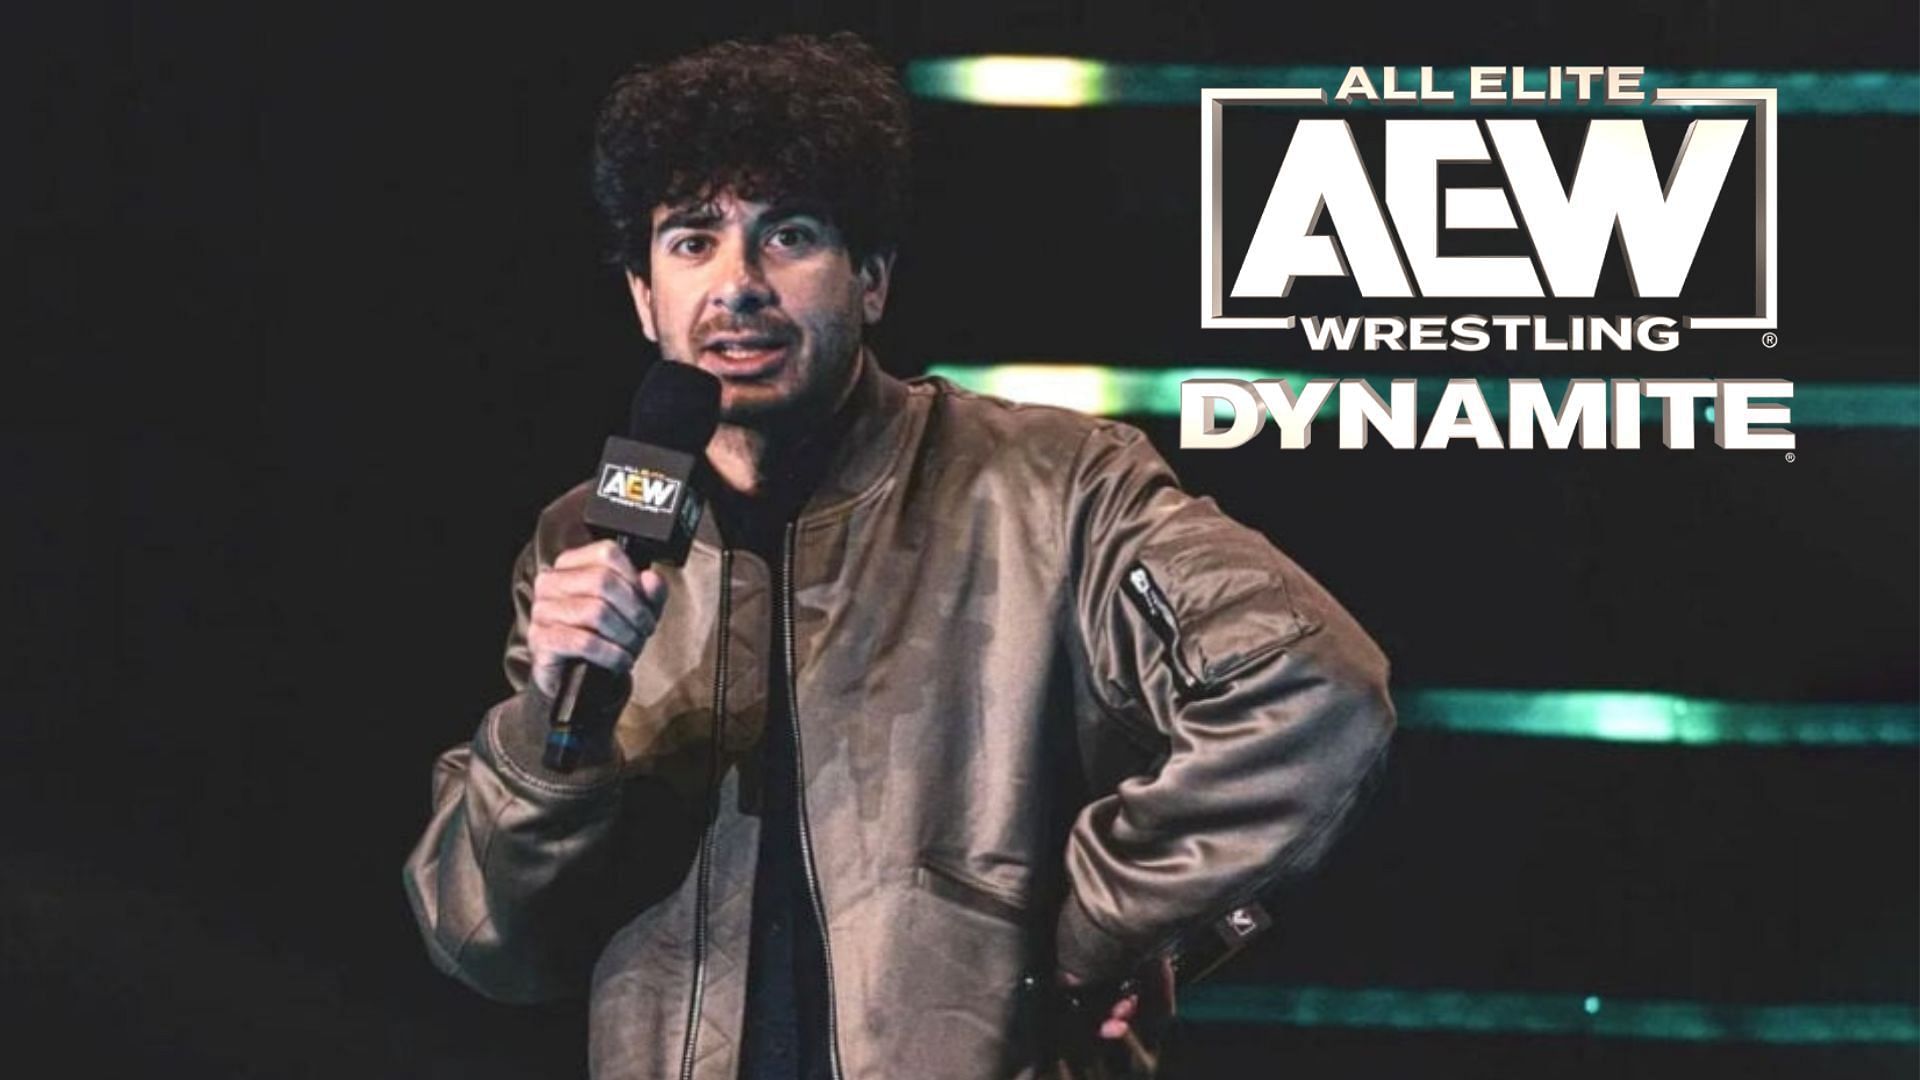 Tony Khan made a huge announcement on AEW Dynamite